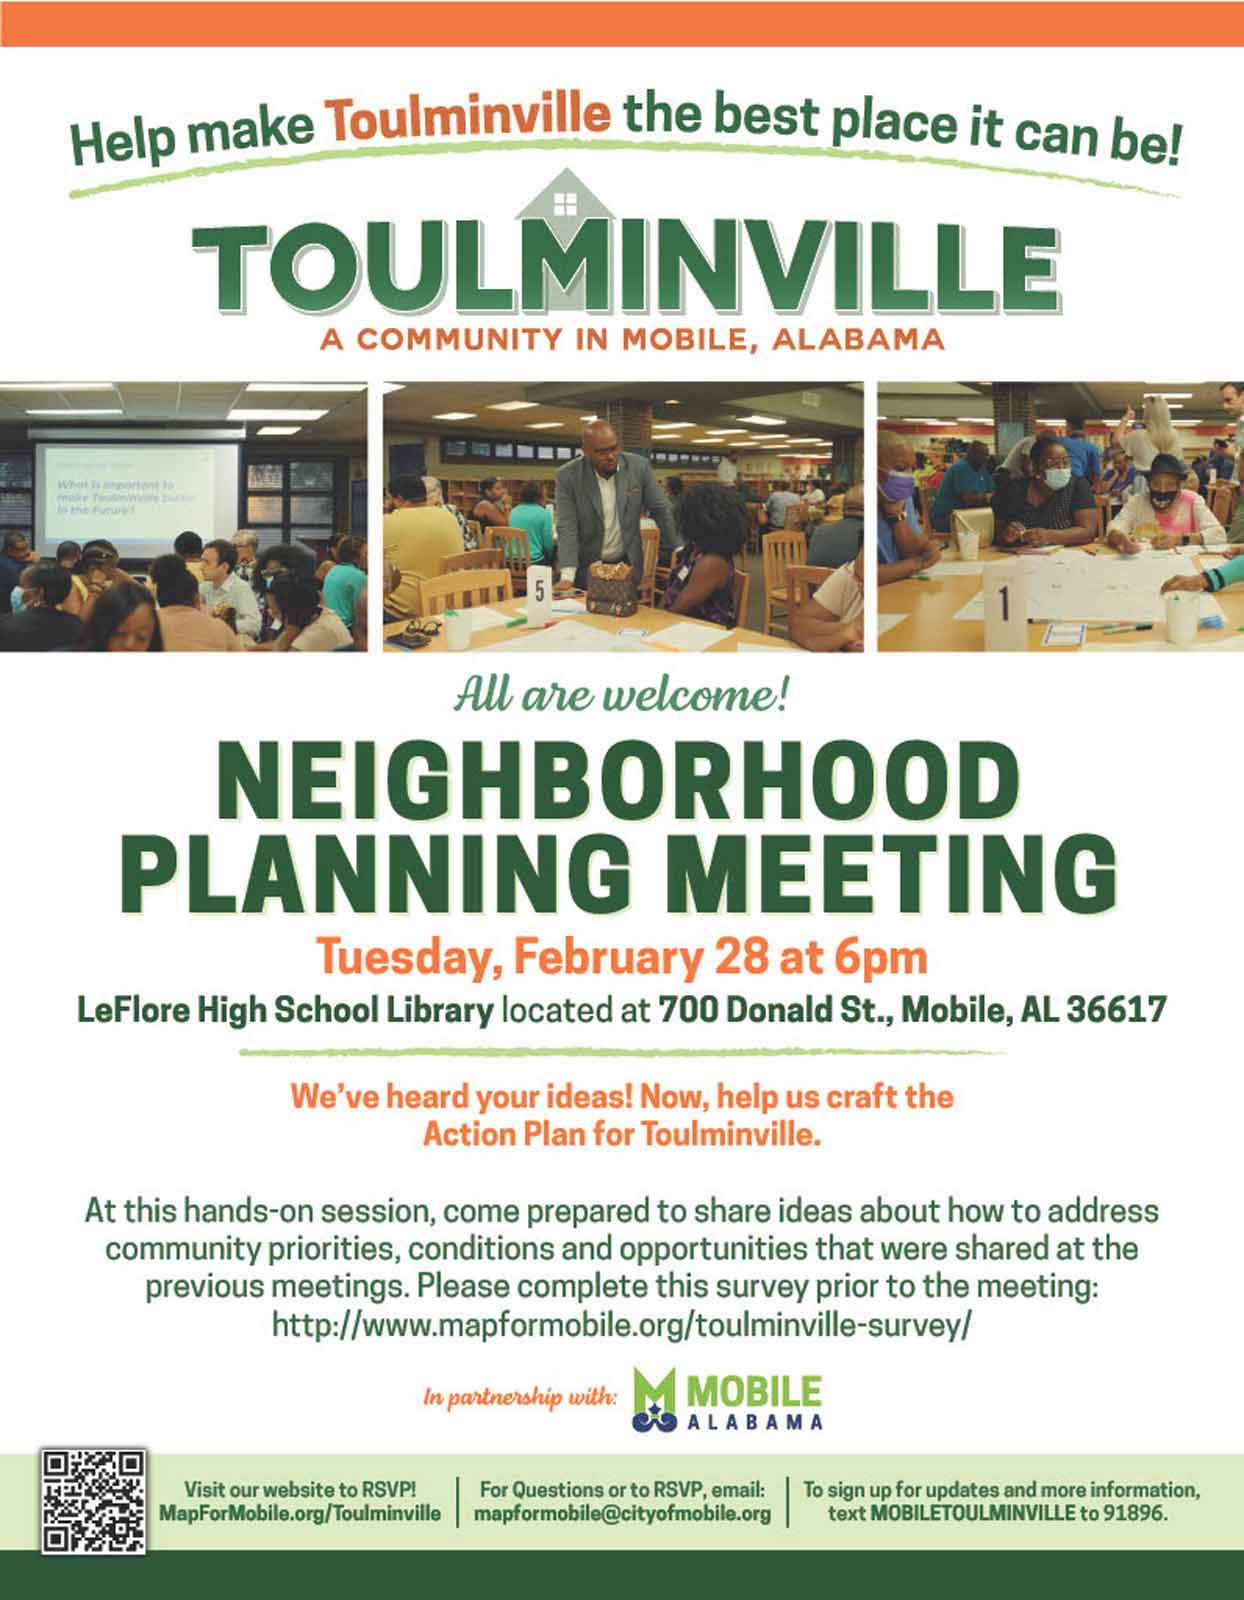 Toulminville Planning Meeting Coming Up